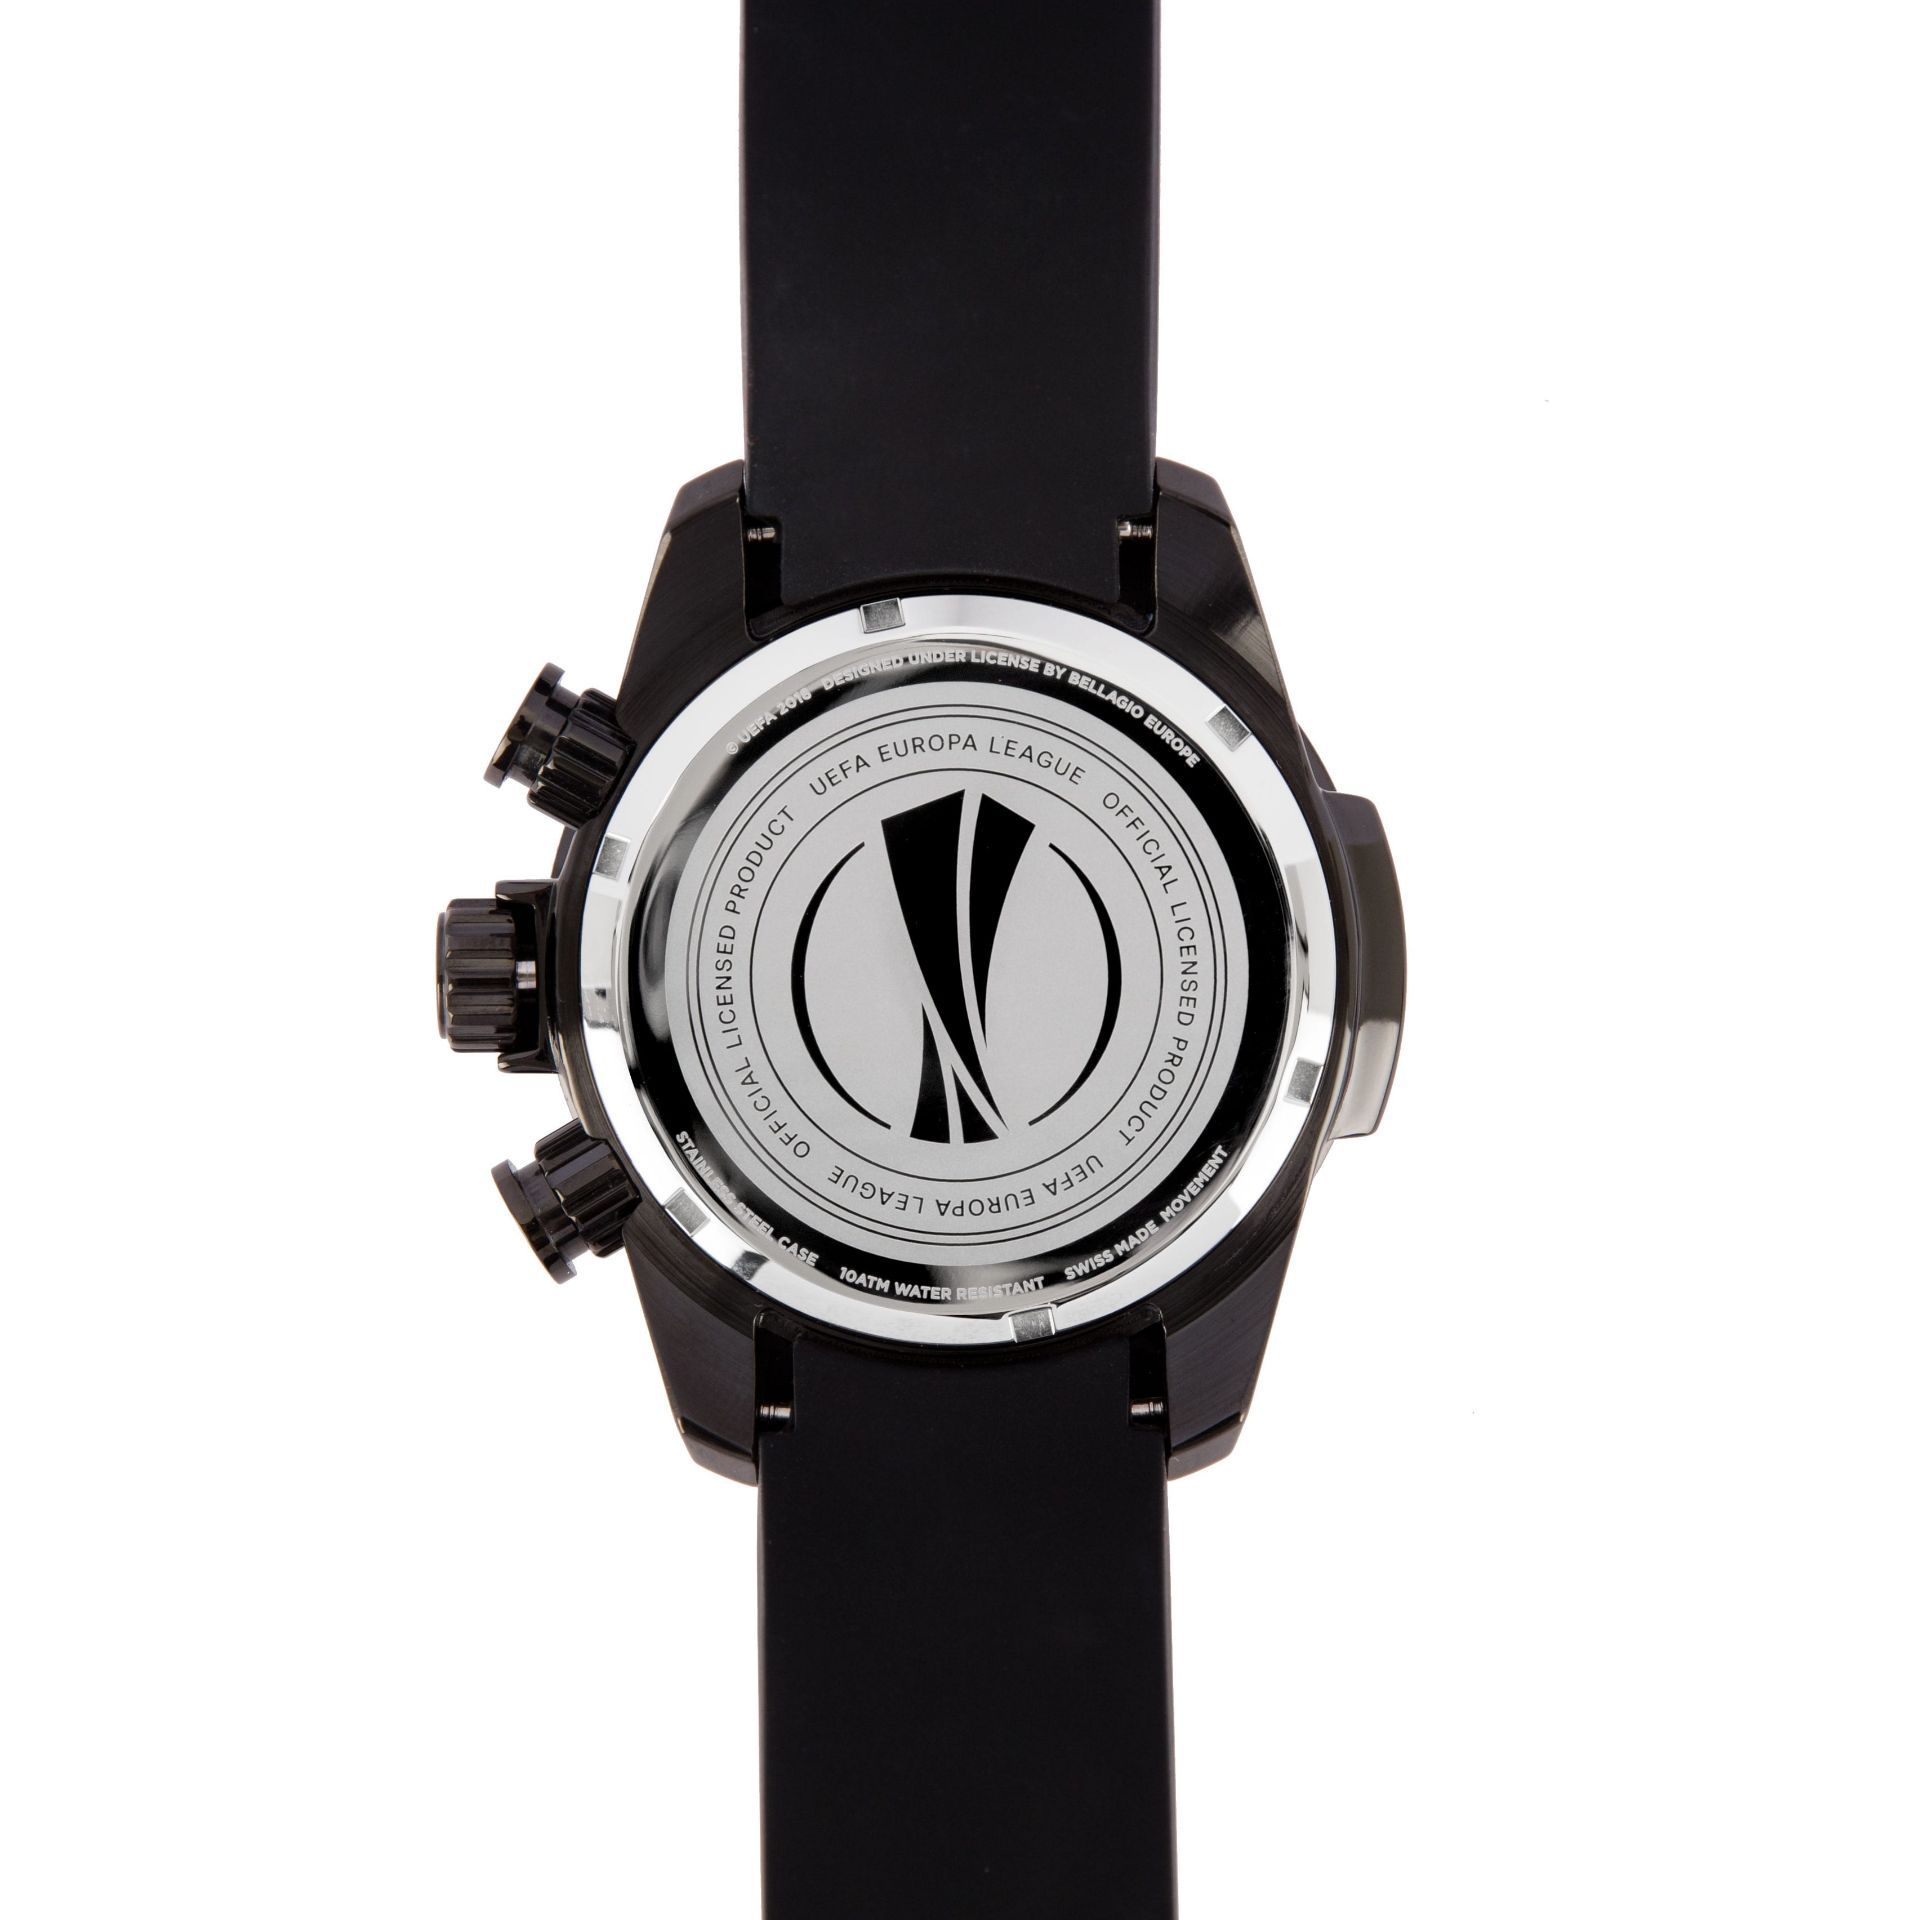 BRAND NEW OFFICIAL UEFA EUROPA LEAGUE 45 MINUTES COUNTDOWN WATCH EL45-BLKB-BLORP, RRP £225 - Image 3 of 5